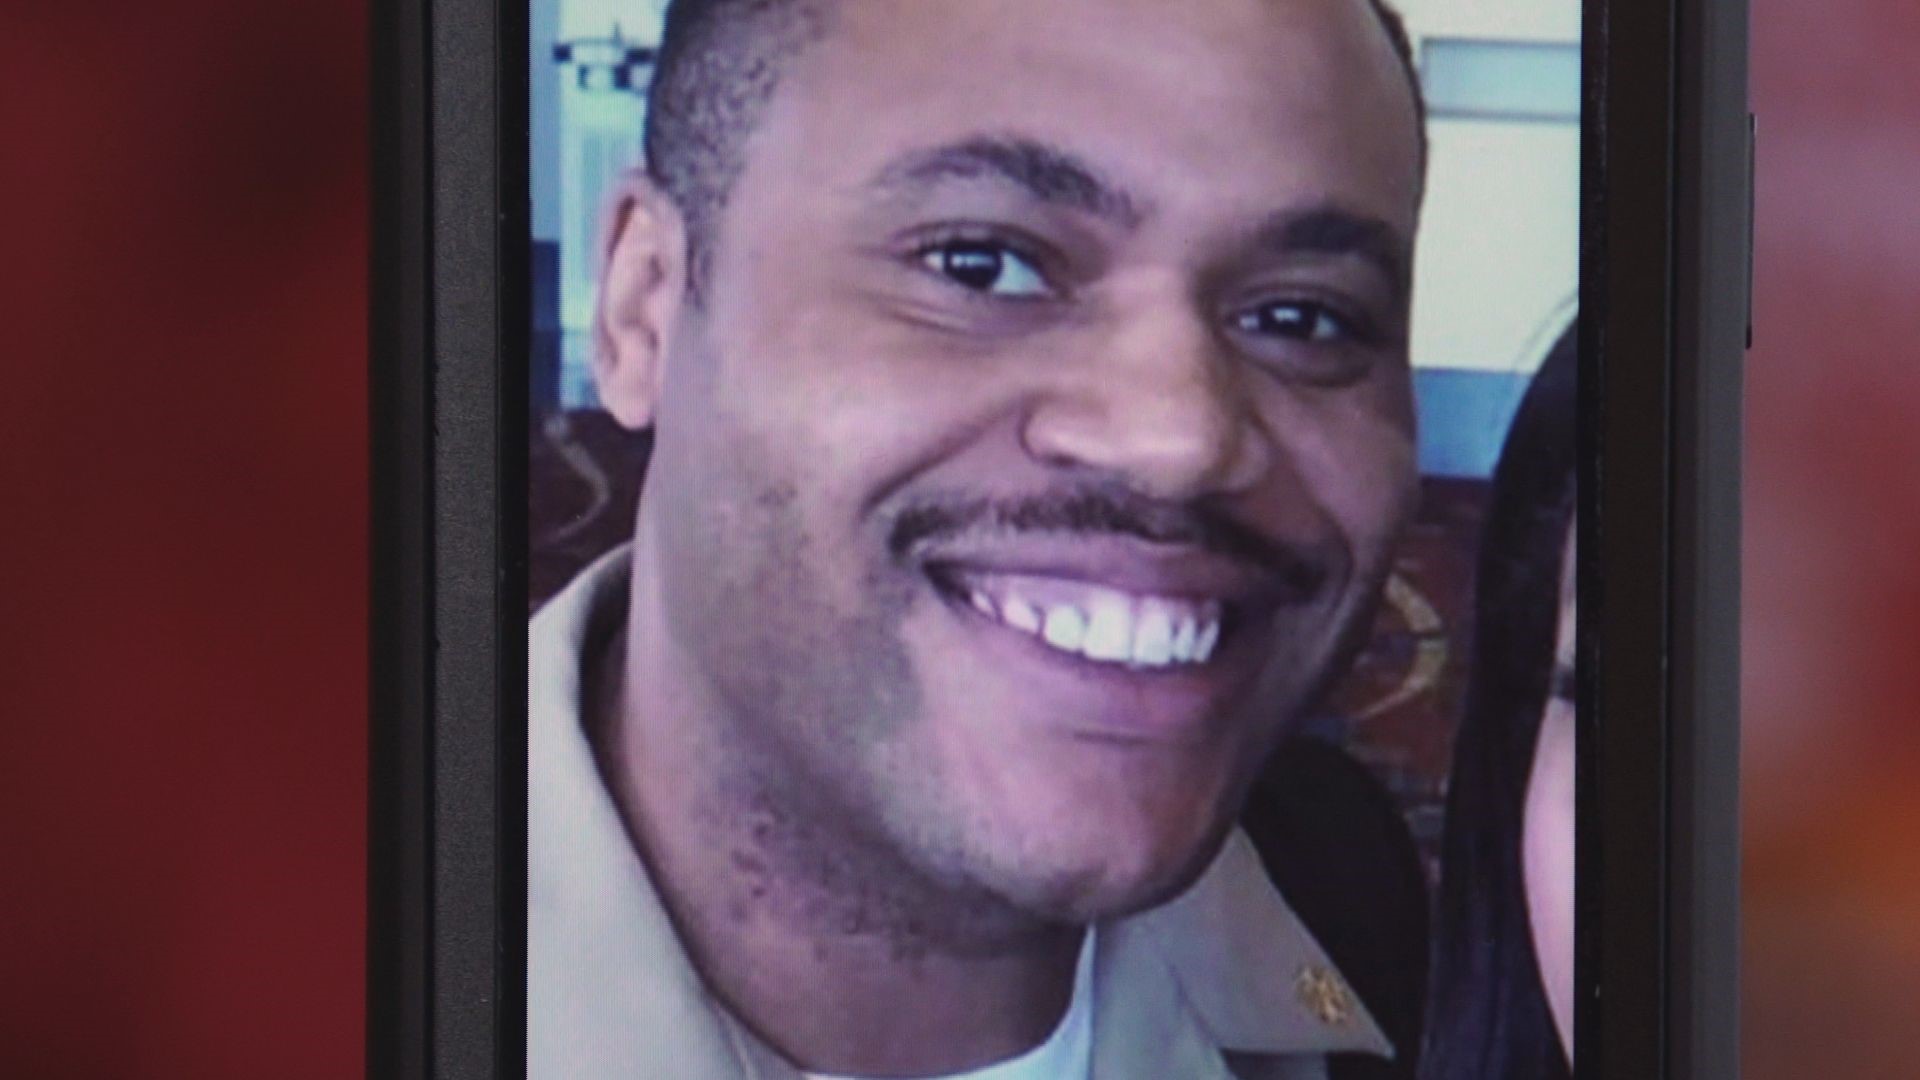 One year since Timothy Cunningham went missing, his legacy in Atlanta quietly